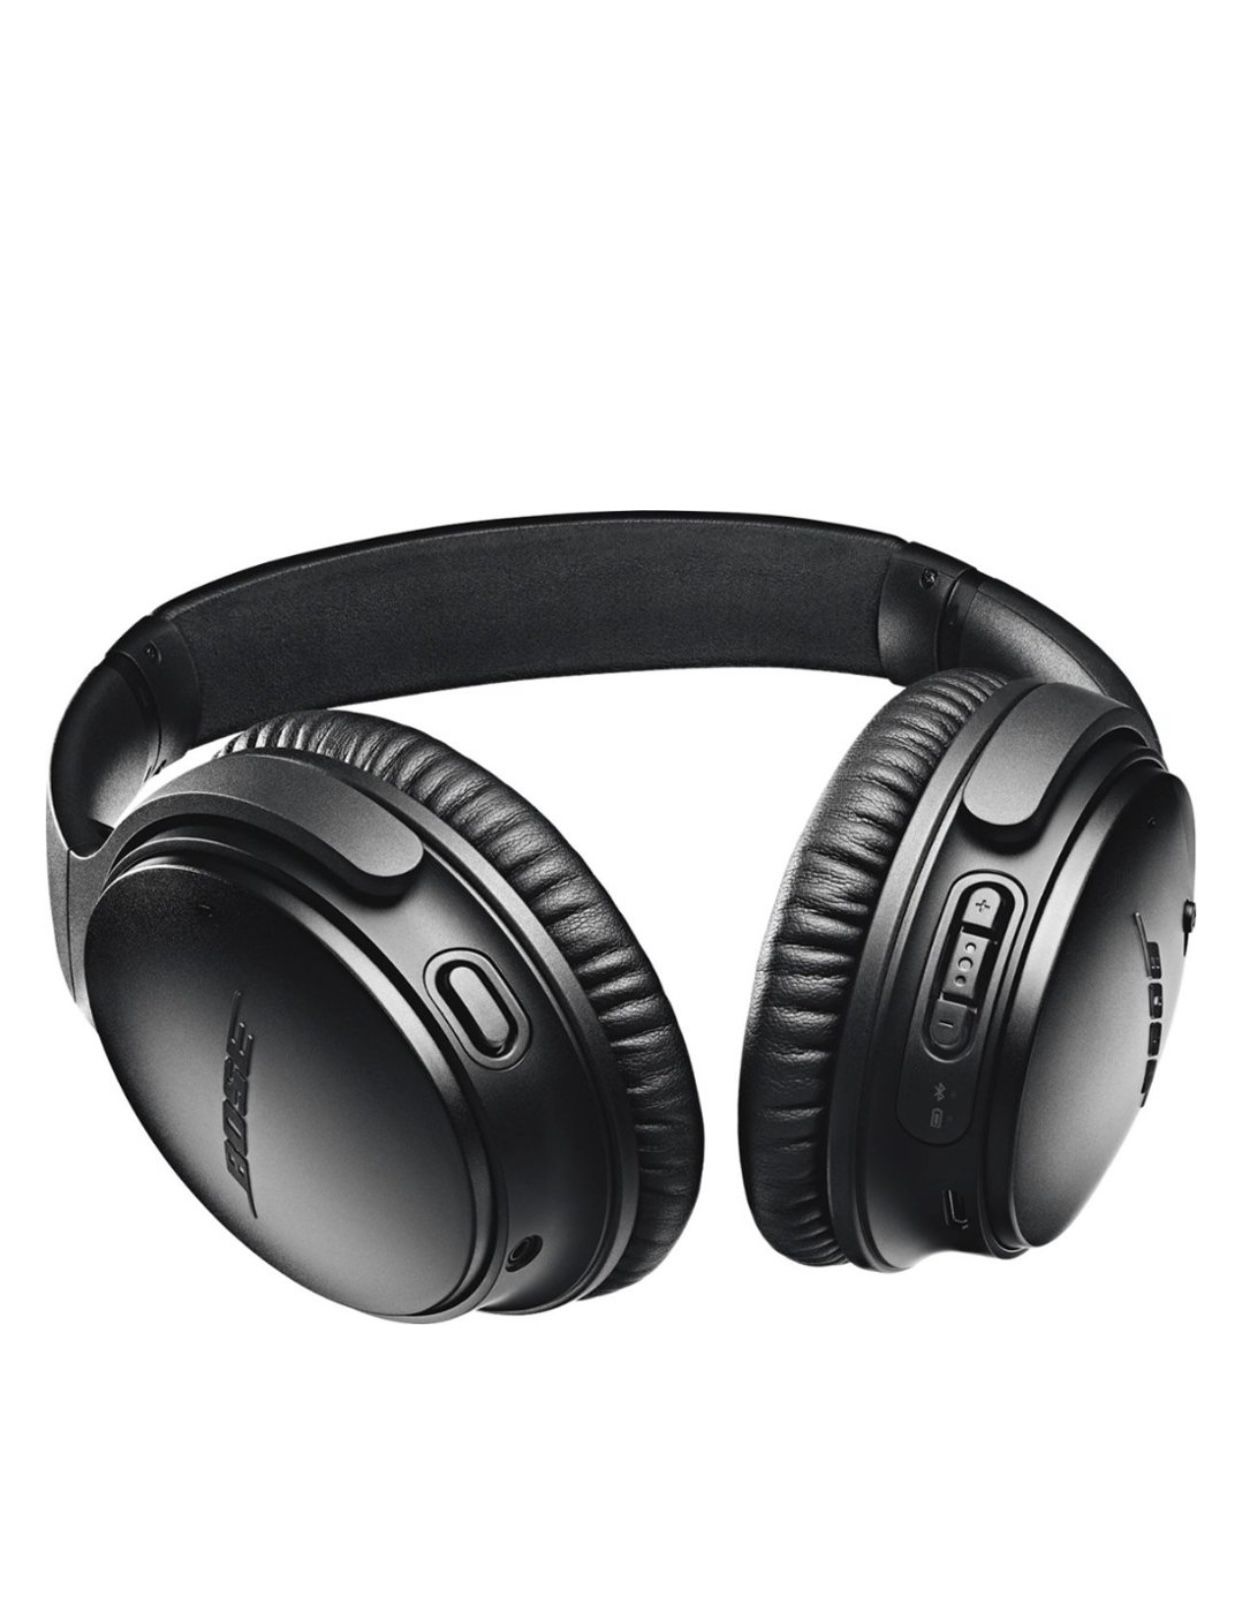 Bose Bose - QuietComfort 35 II Wireless Noise Cancelling Headphones - Black / White - ( 2 Yrs Warranty cost + Tax included )